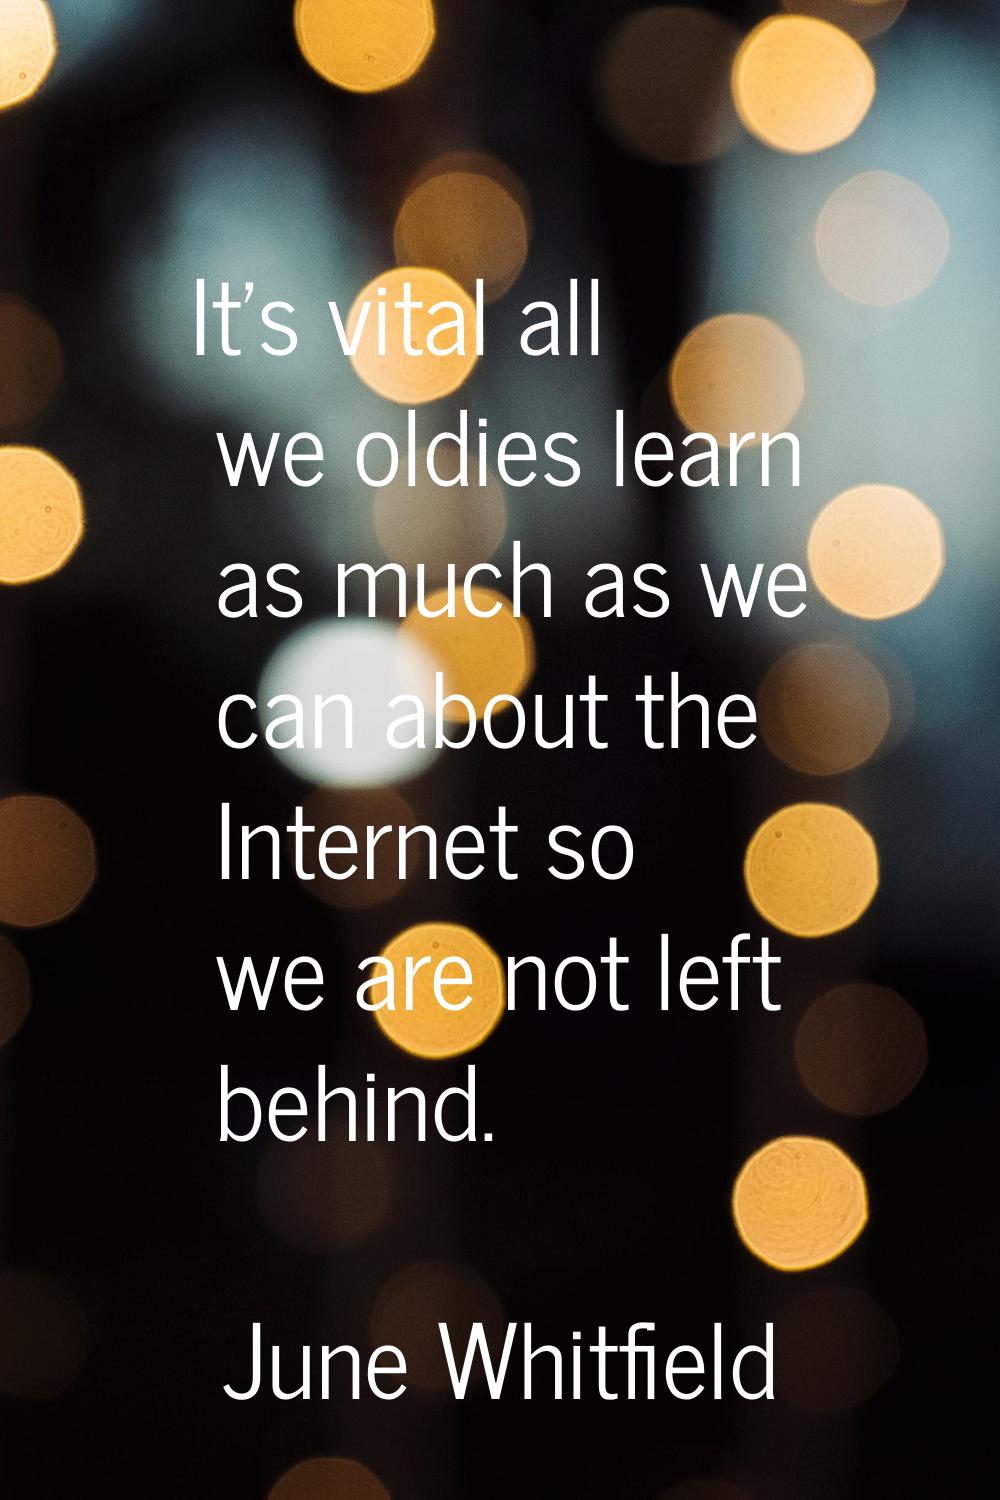 It's vital all we oldies learn as much as we can about the Internet so we are not left behind.